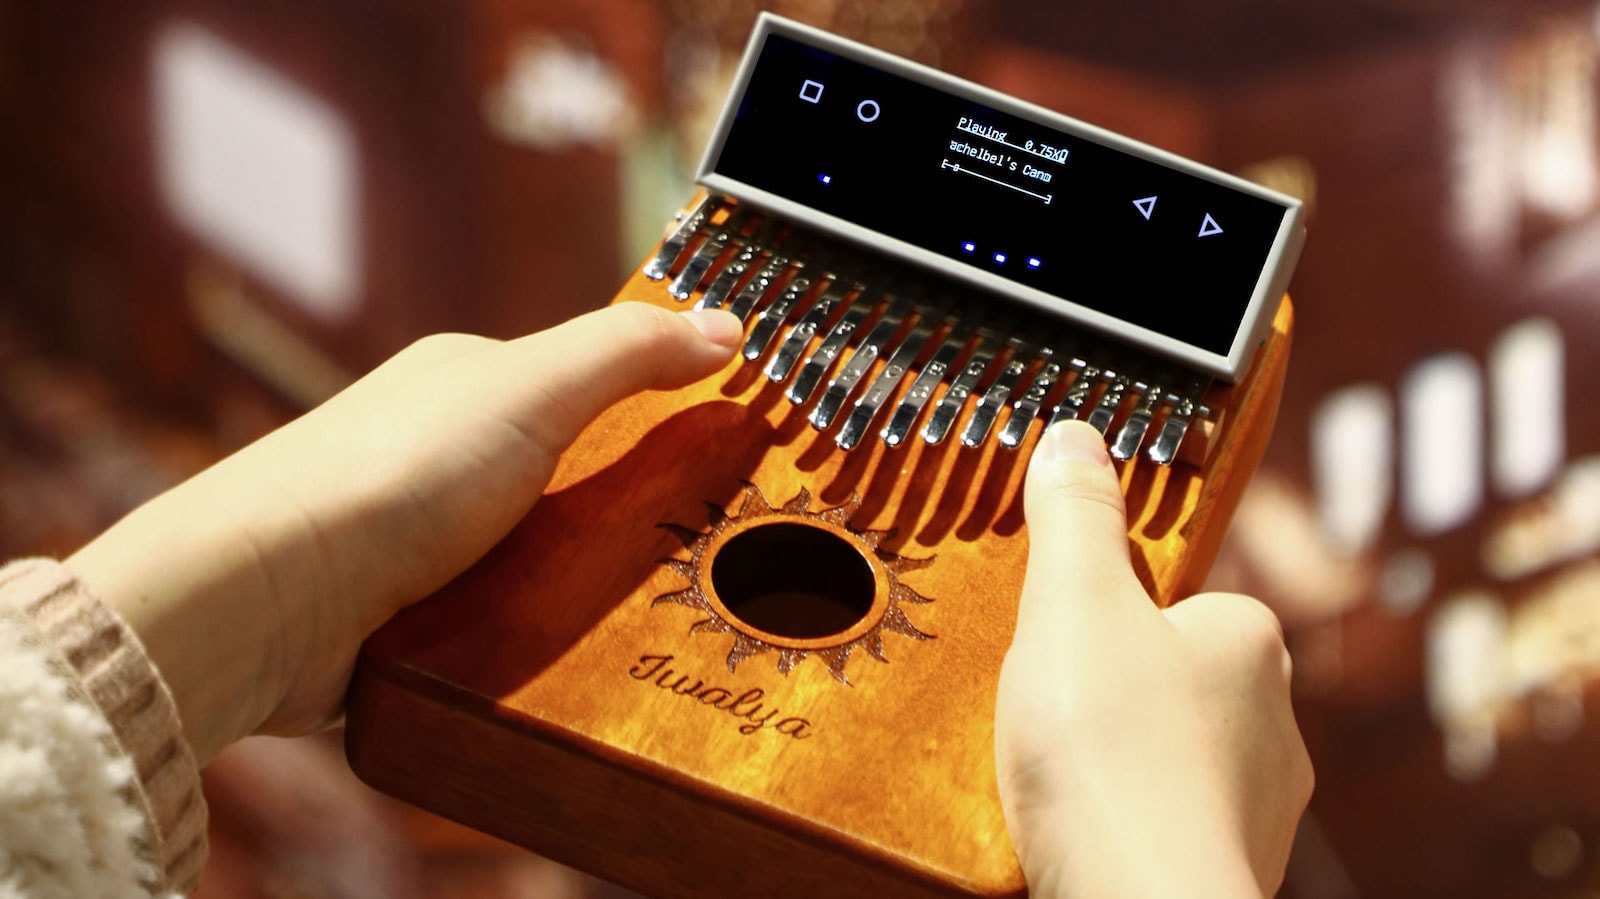 Thumb Piano Review: Perfect Gift for Him